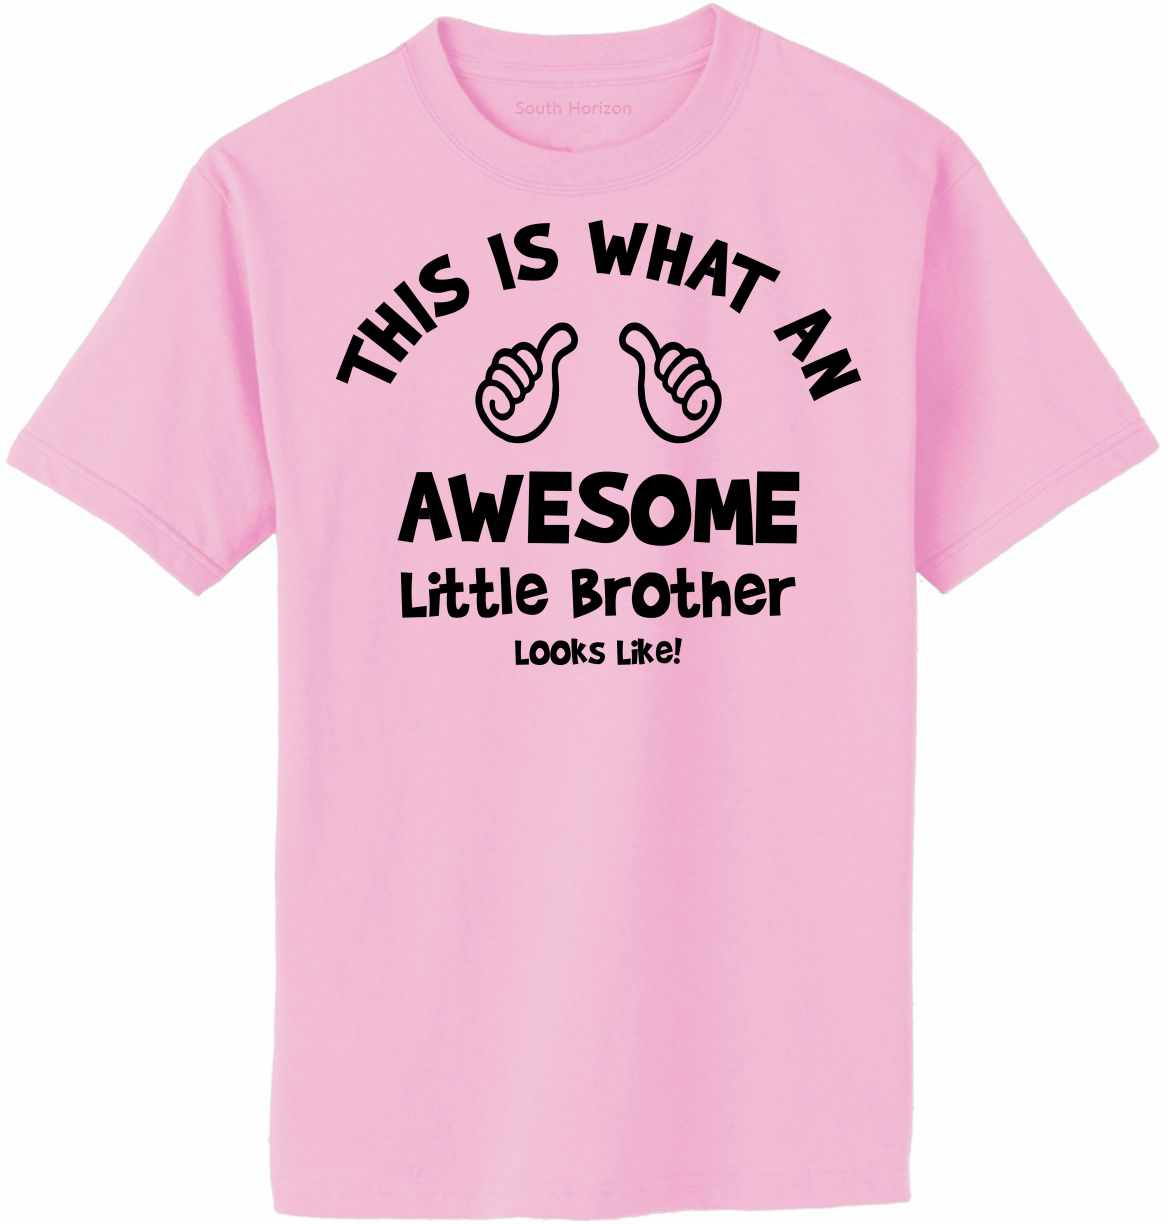 This is What an AWESOME LITTLE BROTHER Looks Like Adult T-Shirt (#1036-1)